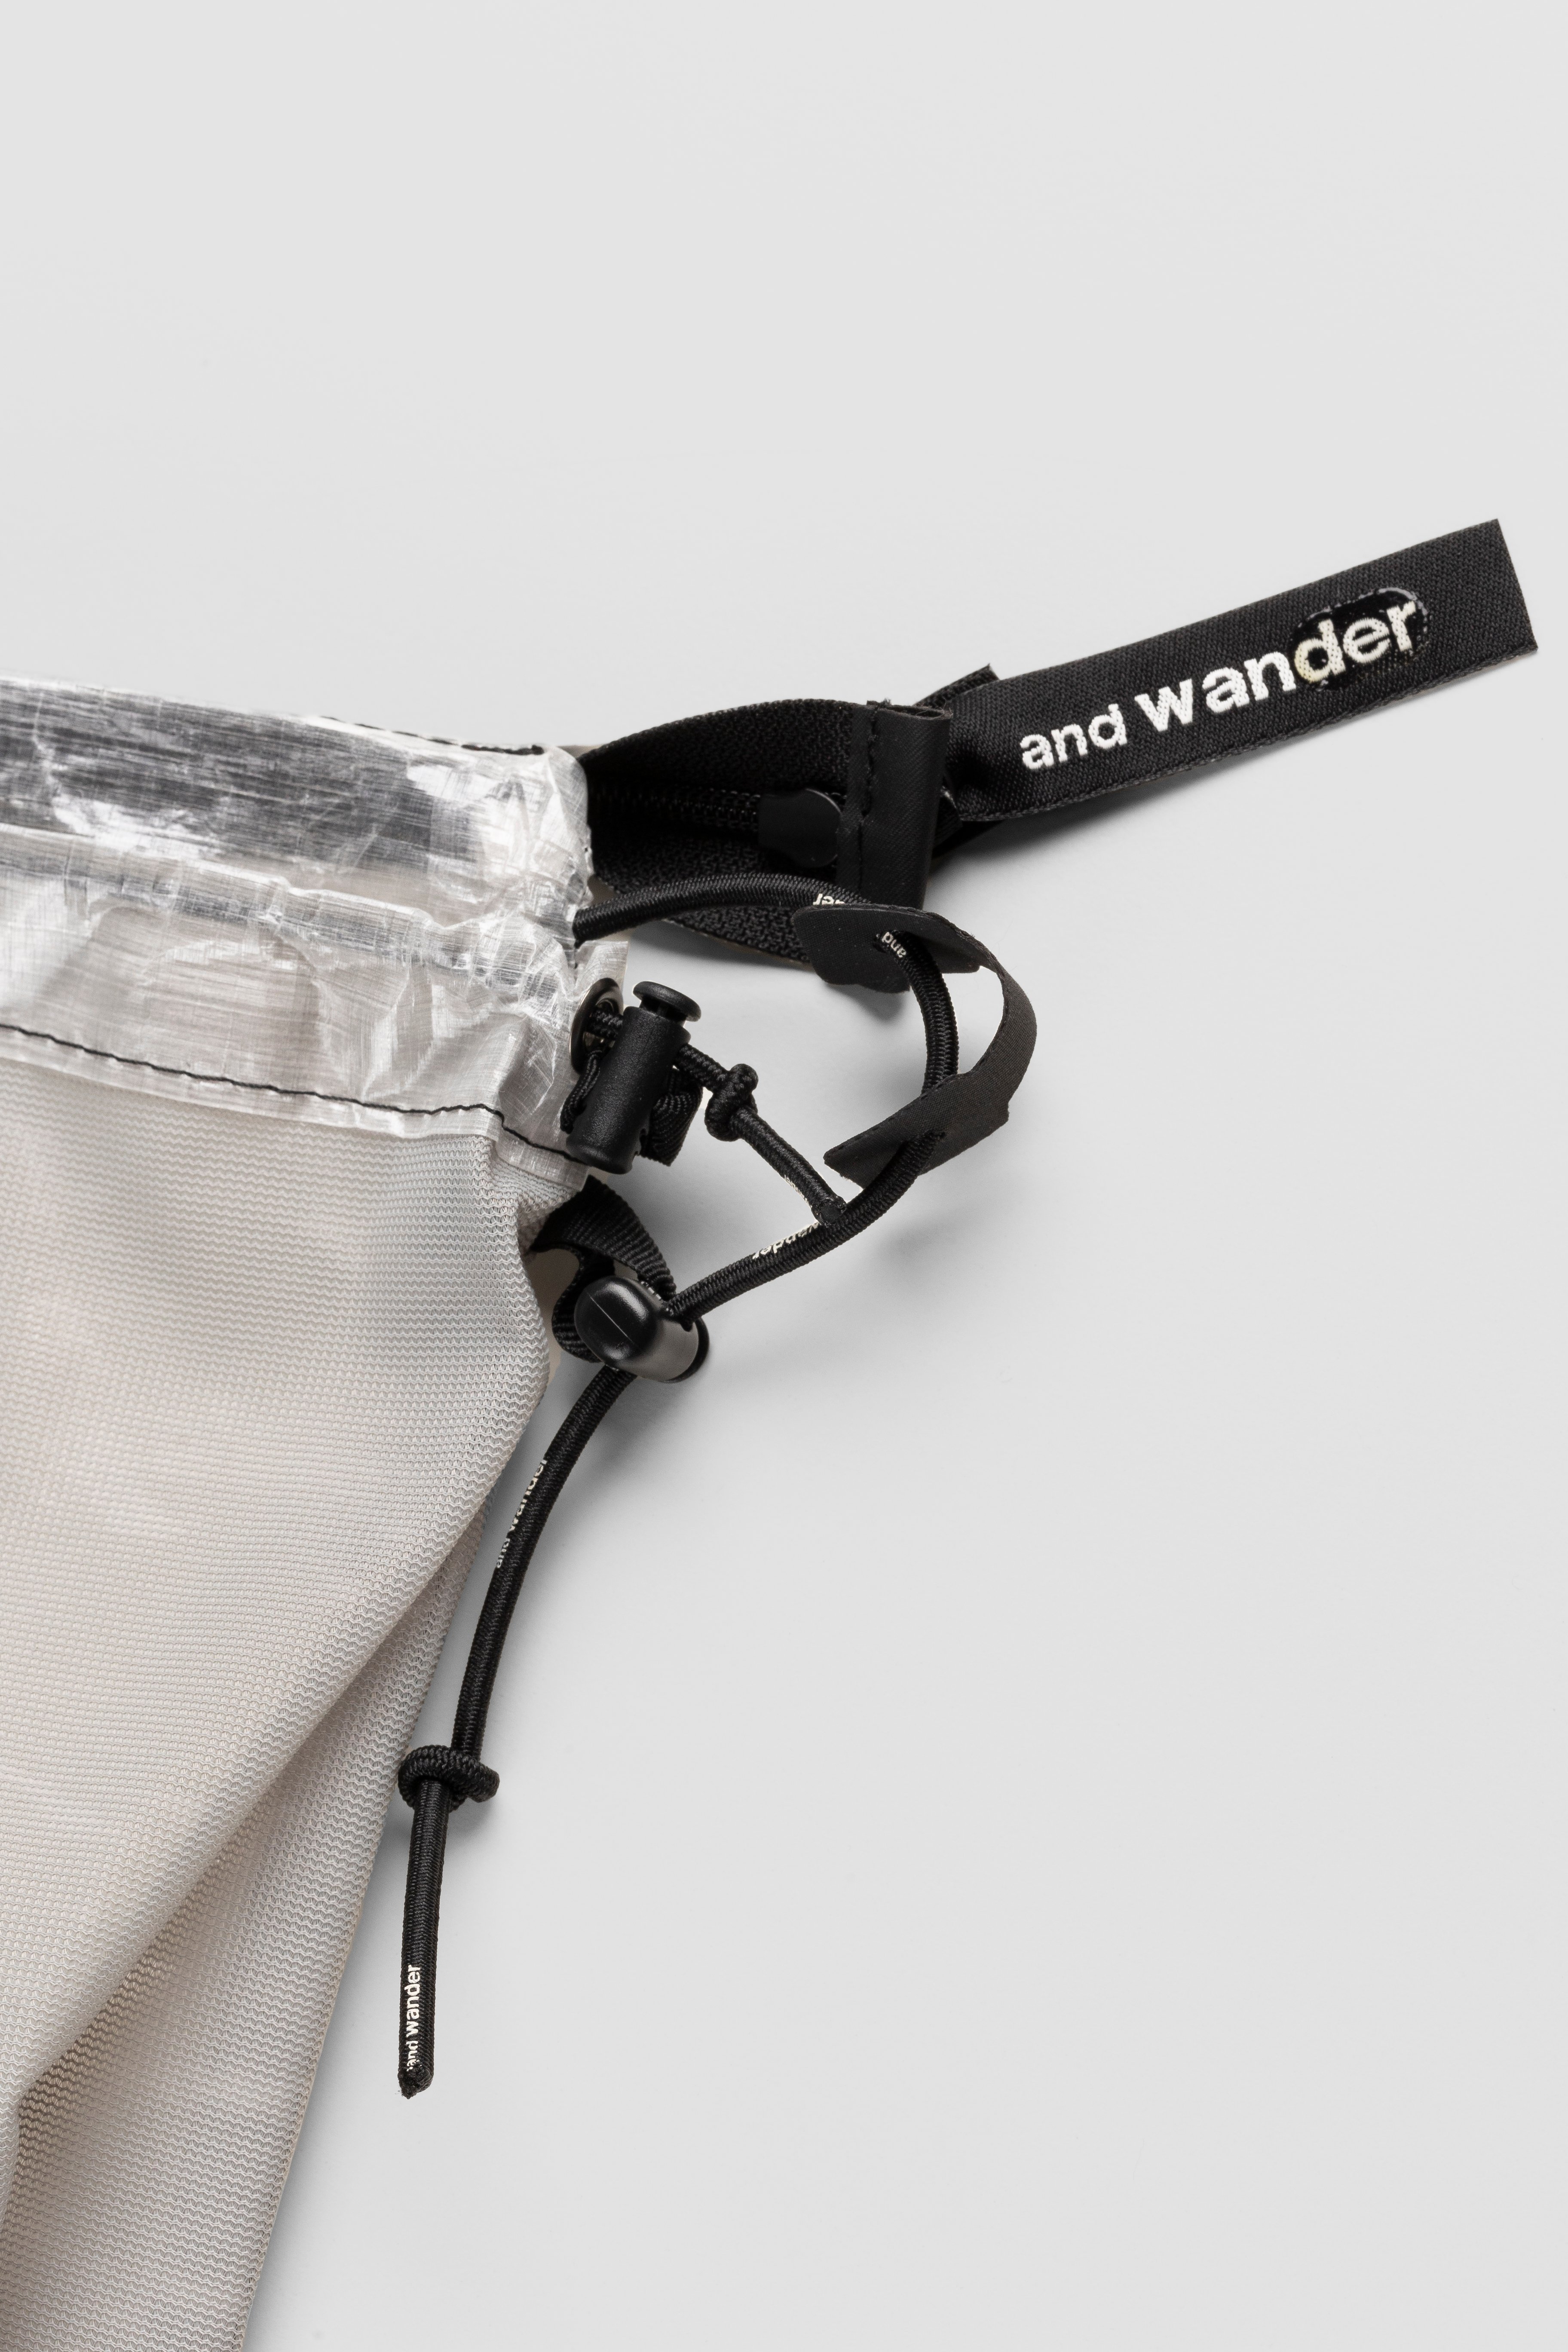 And Wander - Dyneema Satchel White - Accessories - White - Image 5